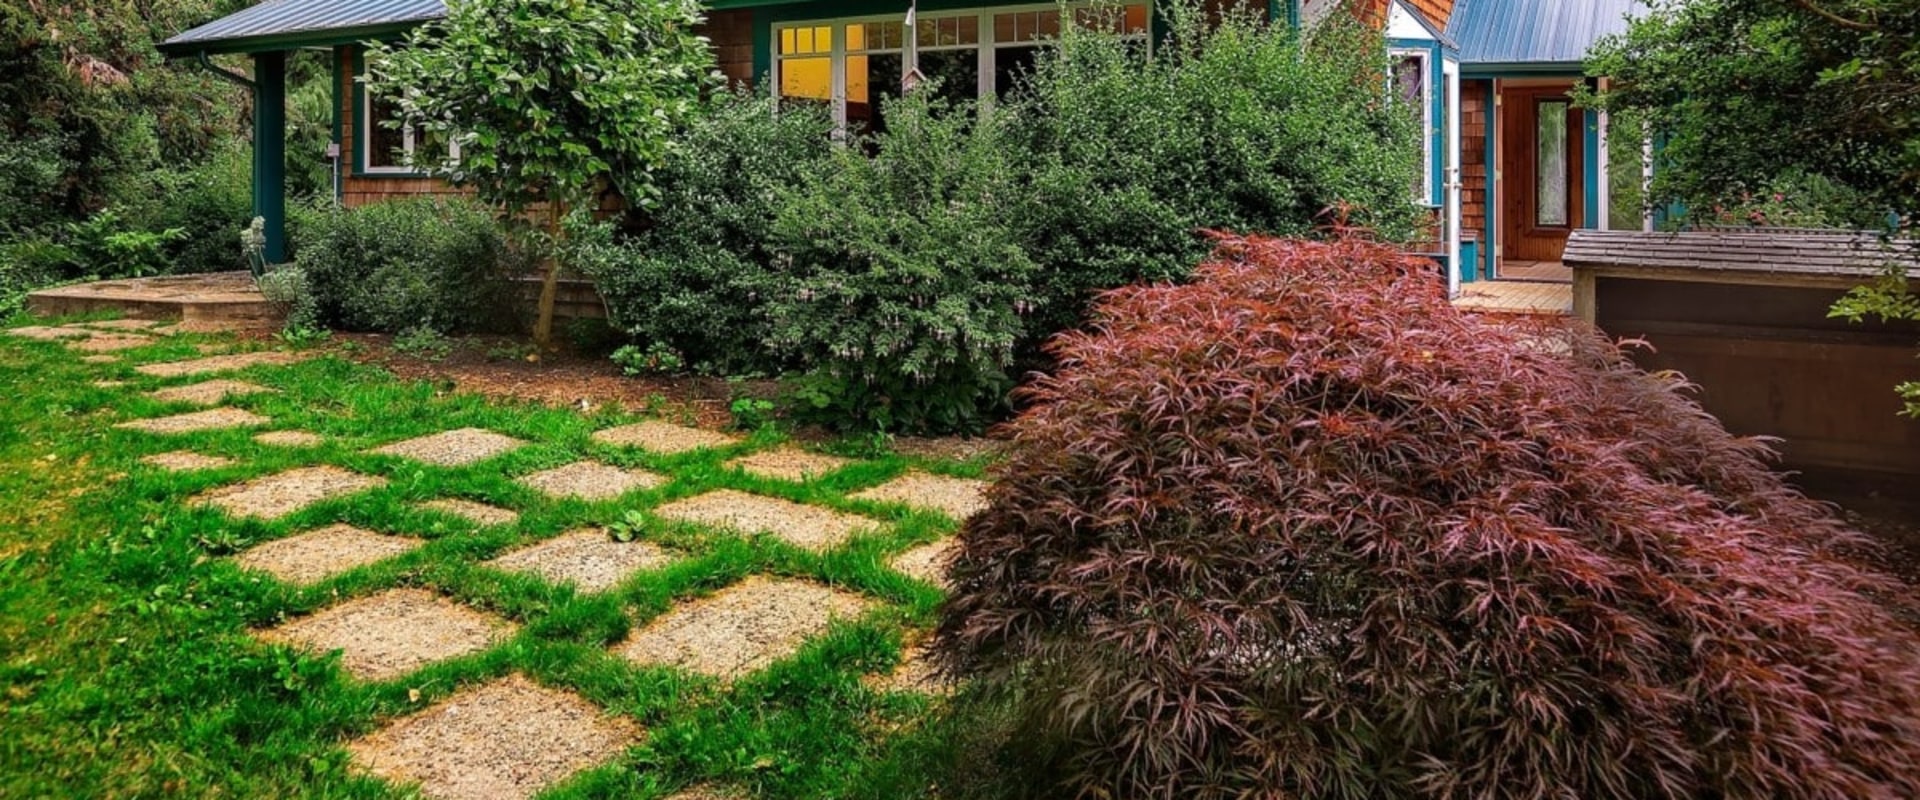 Making Your Residential Landscaping More Sustainable